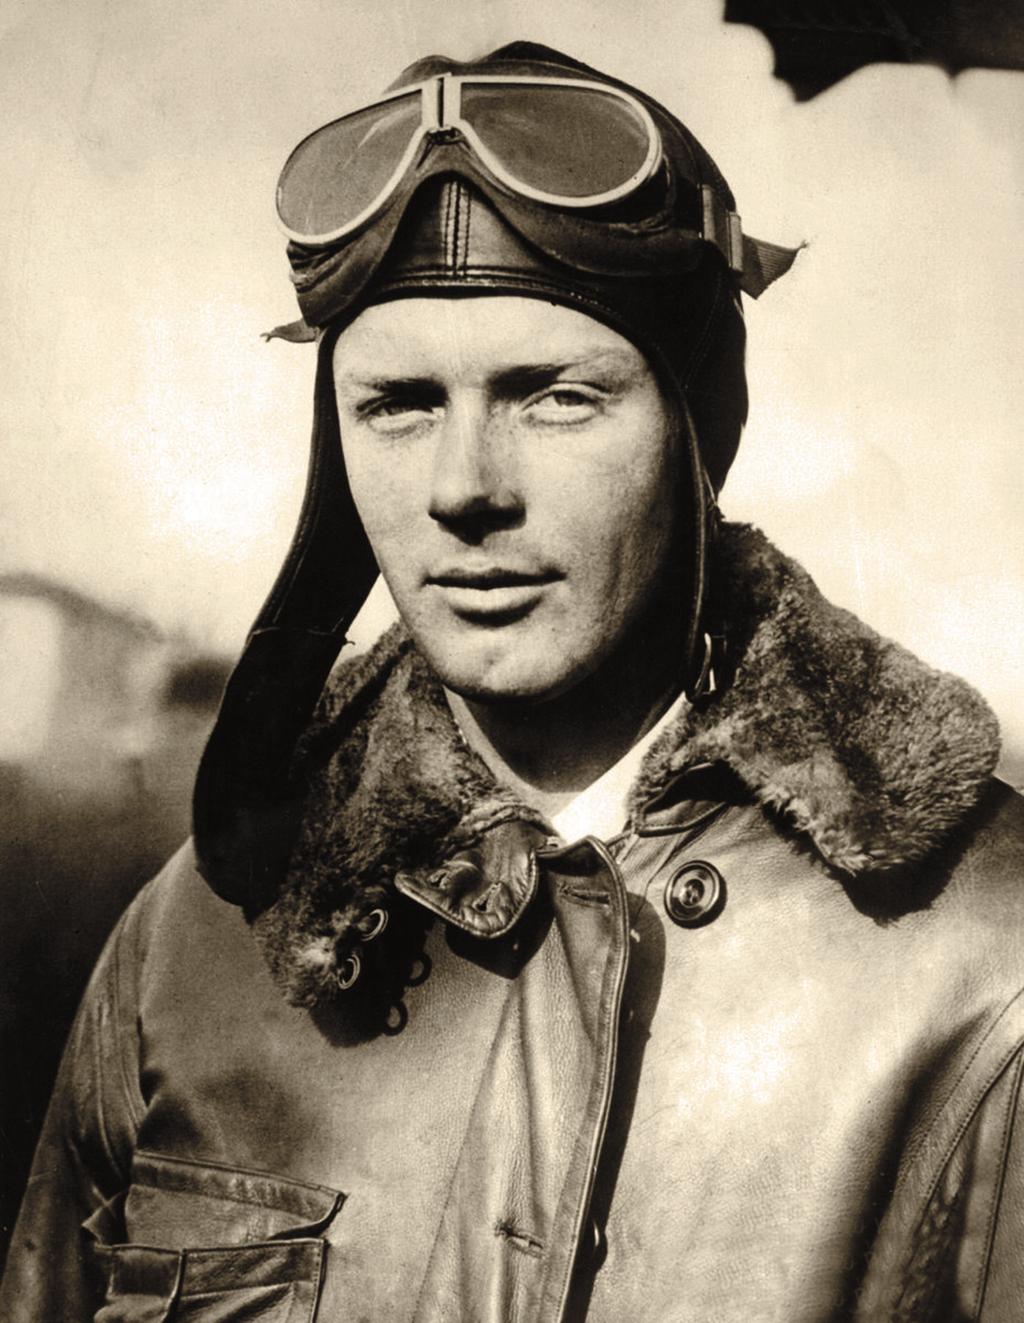 Volume 48 No. 2 Issue #116 September 2015 Lindbergh-Summit Connection? The 1932 kidnapping of Charles Augustus Lindbergh, Jr.